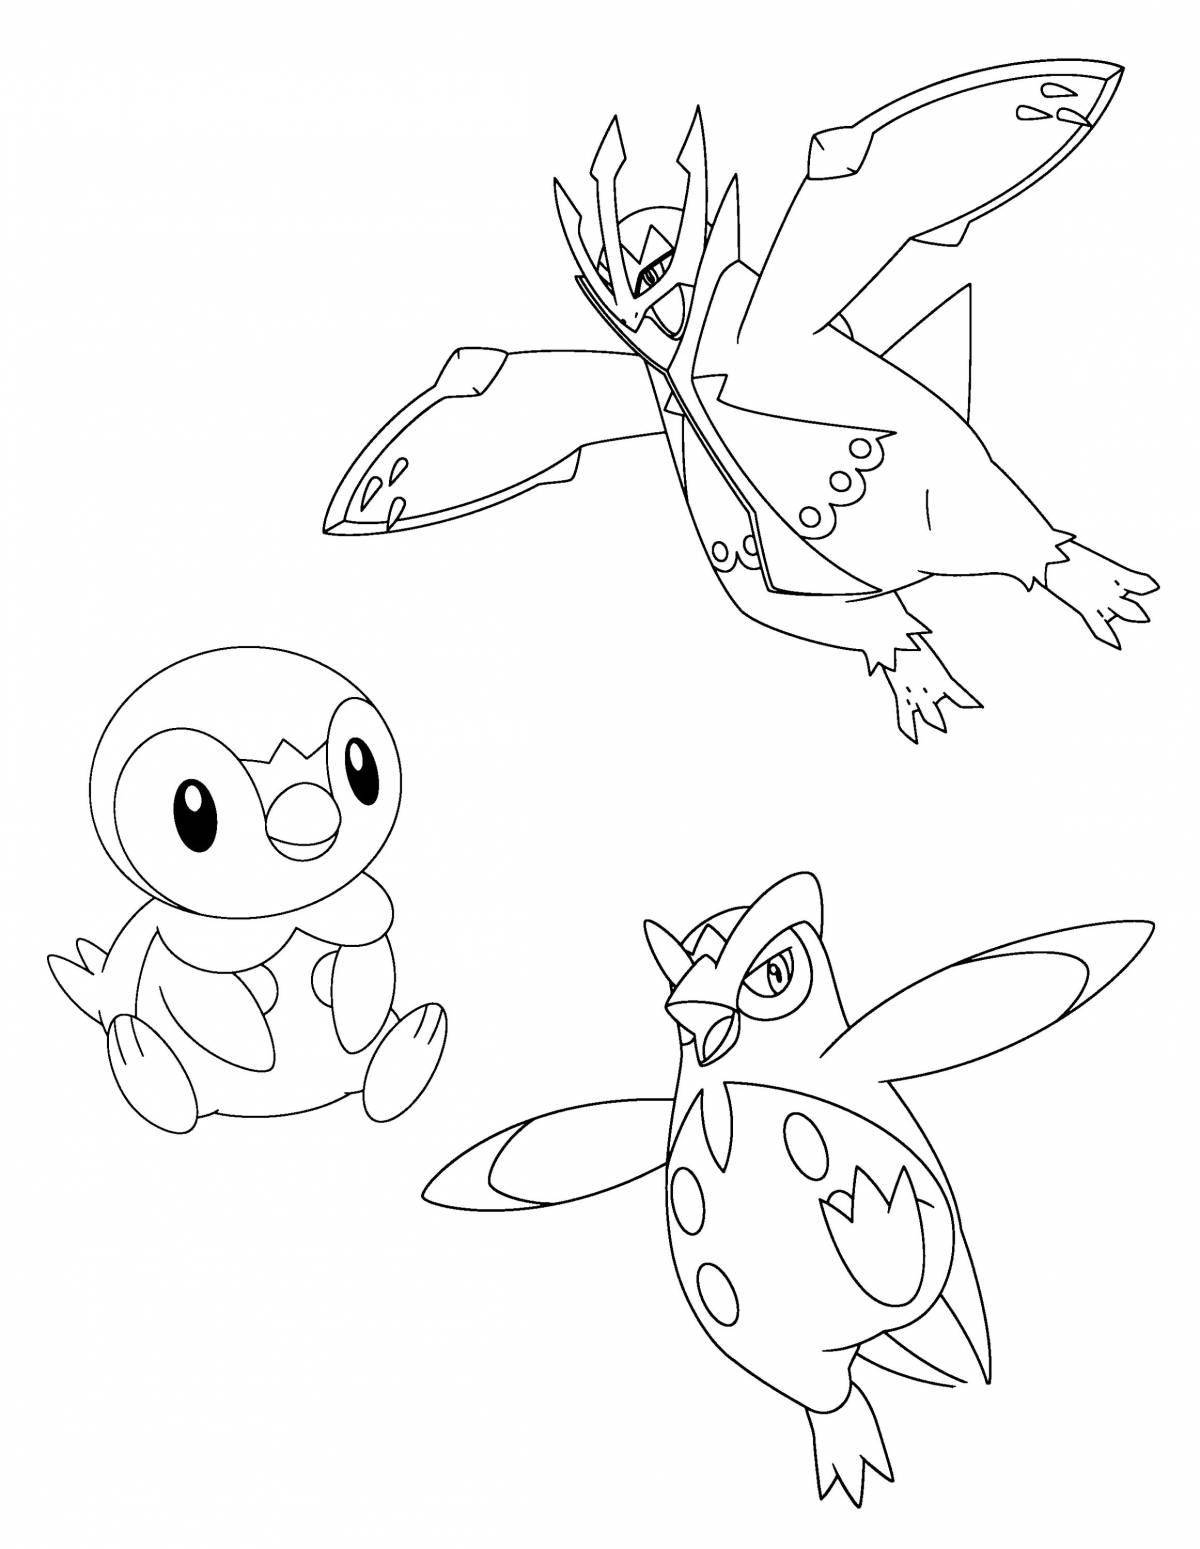 Coloring bright piplup pokemon